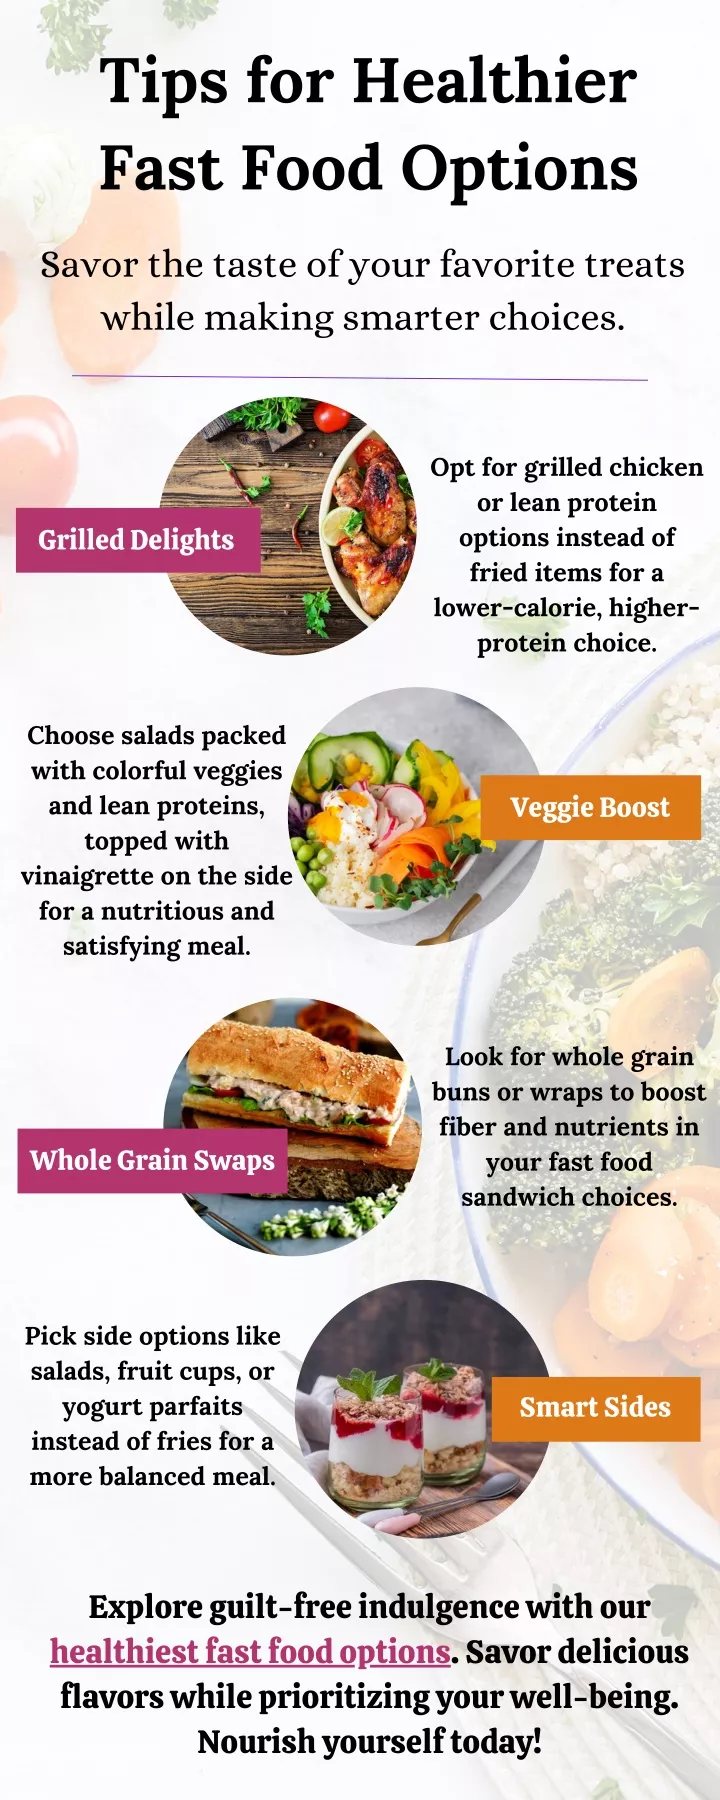 tips for healthier fast food options